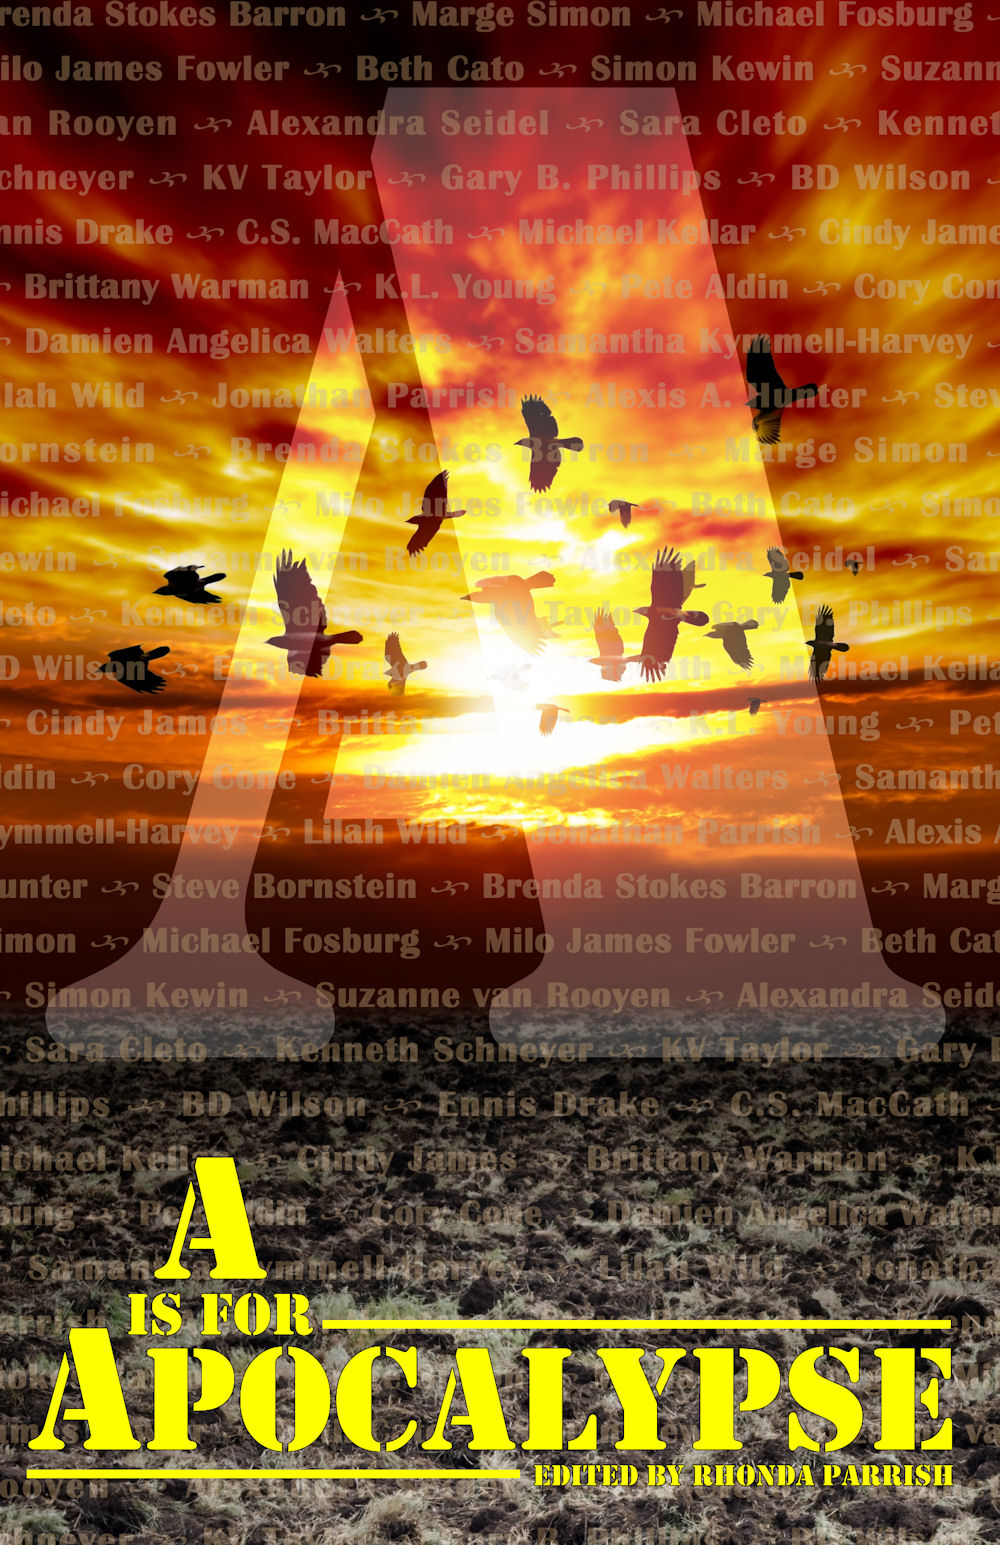 A is for Apocalypse edited by Rhonda Parrish, cover design by Jonathan Parrish